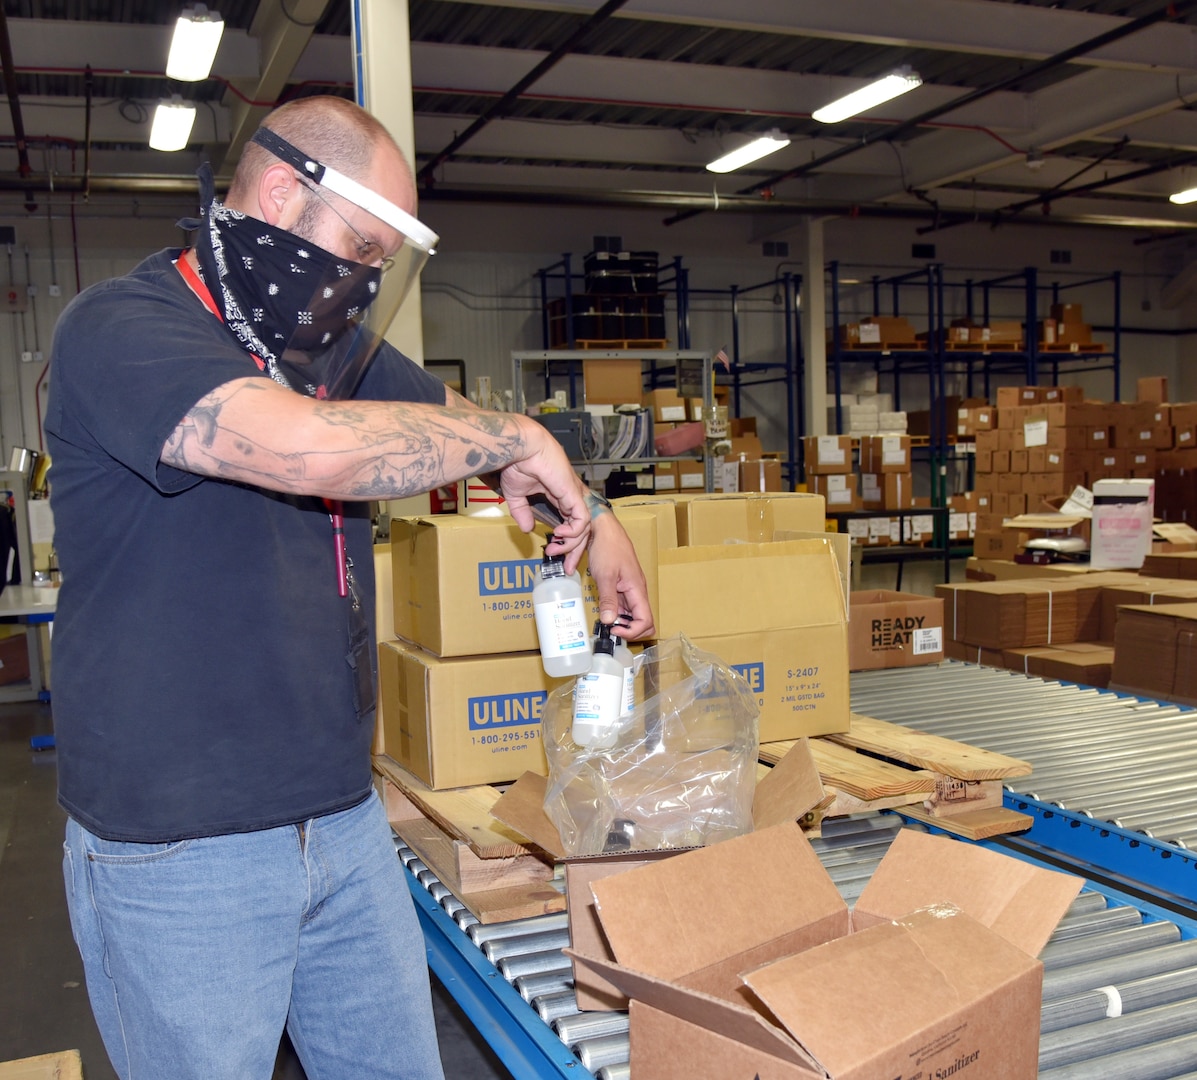 Paul Wolf, supply technician at DLA Distribution, prepares expedited PPE shipments from Susquehanna, Pennsylvania on July 14, 2020.